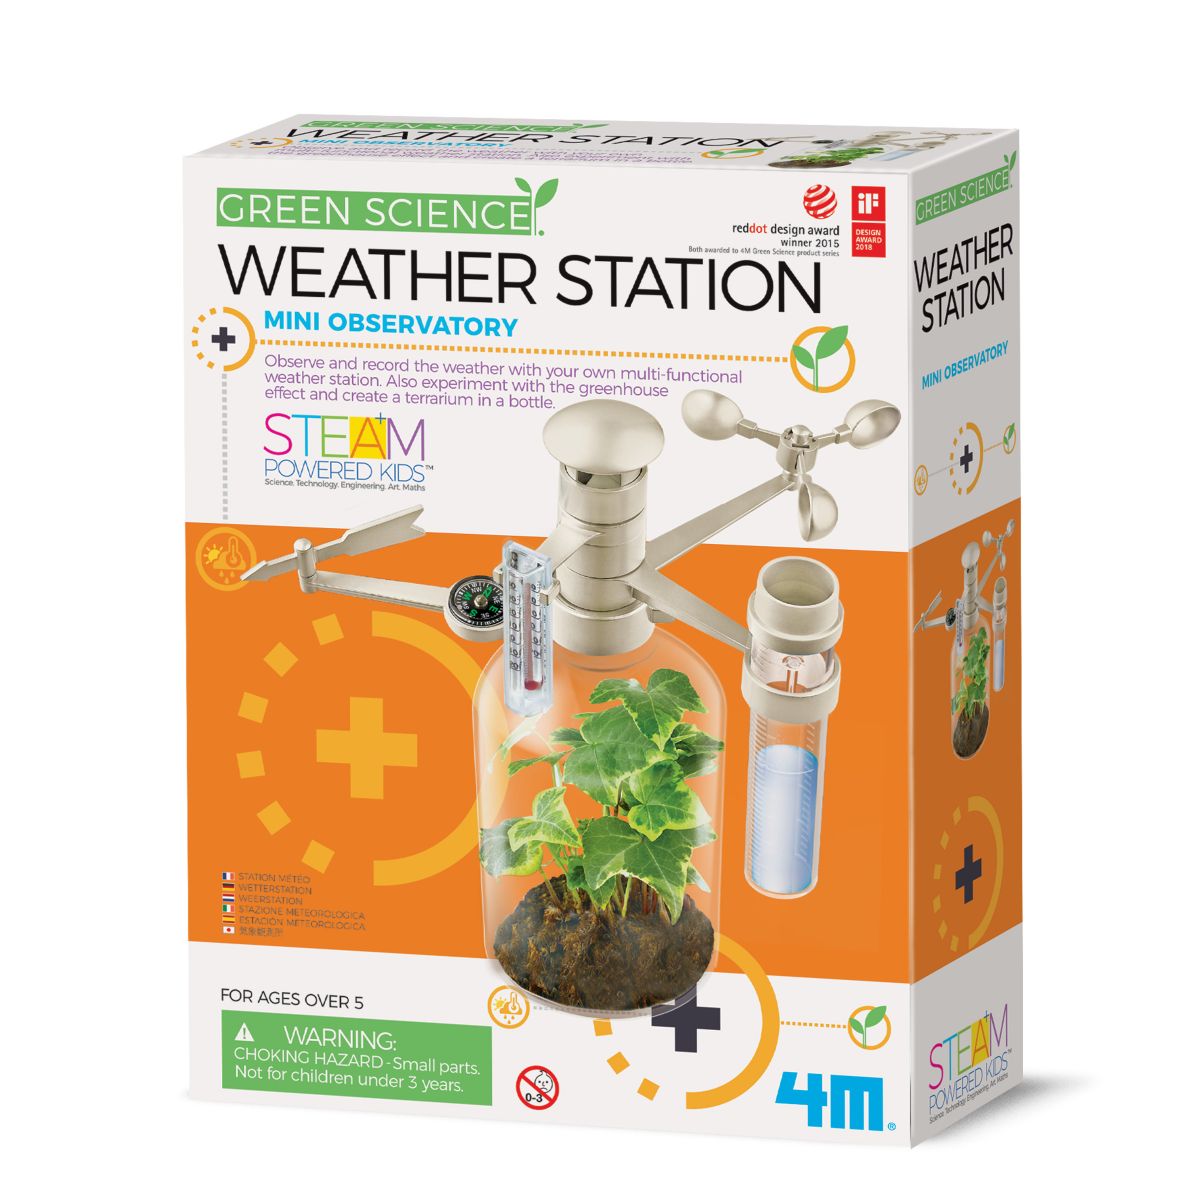 Green Science / Weather Station